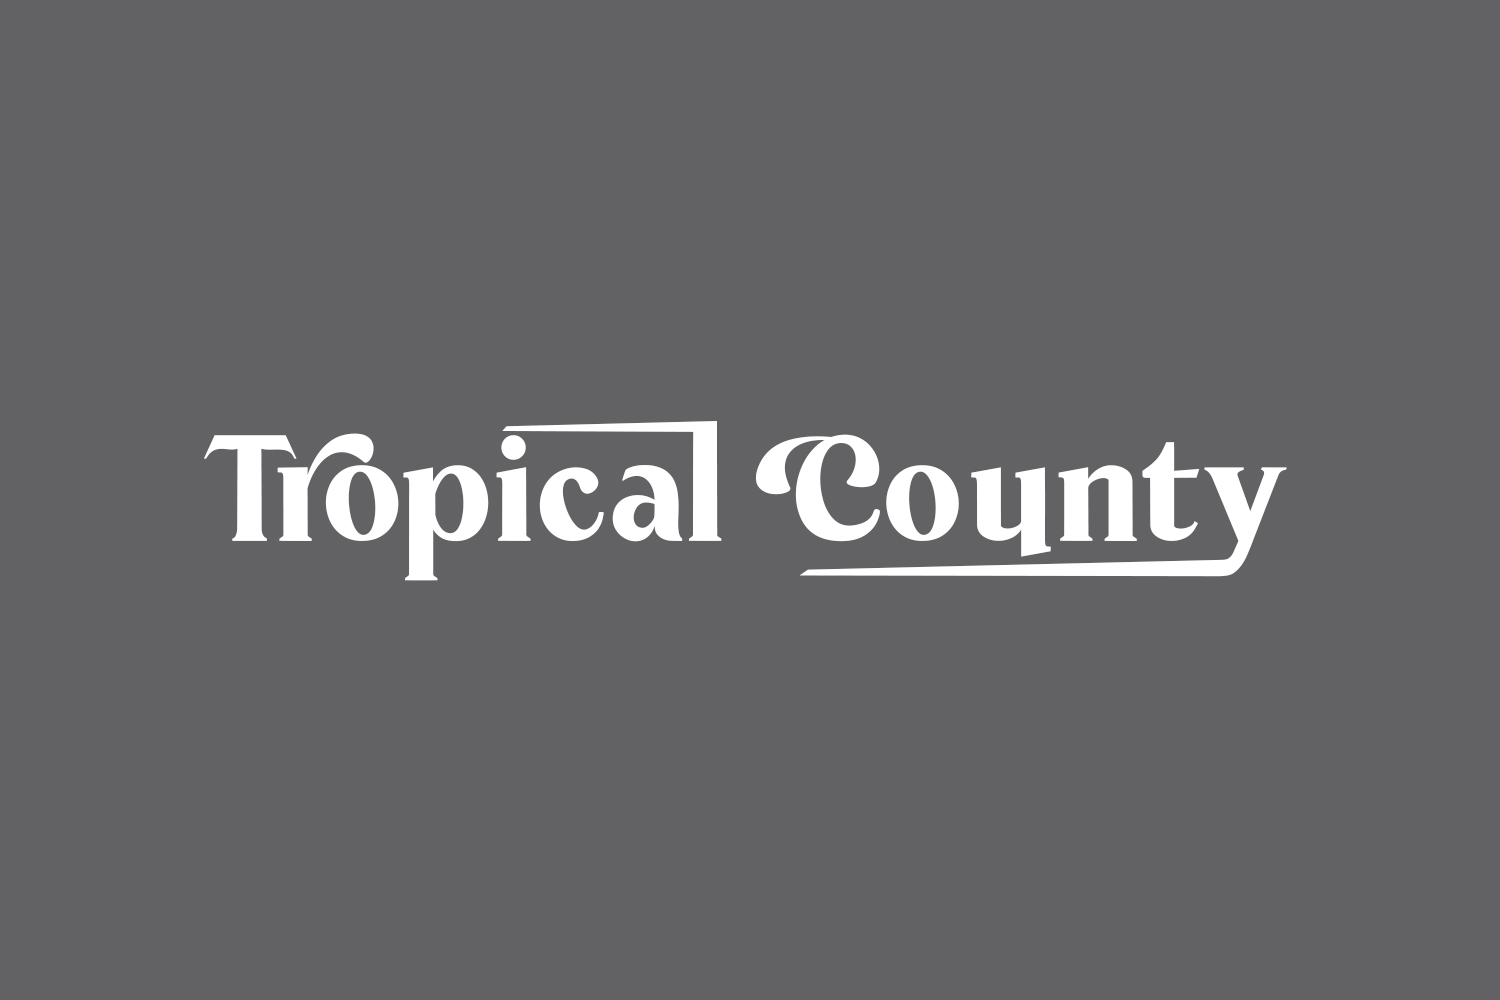 Free Tropical County Font